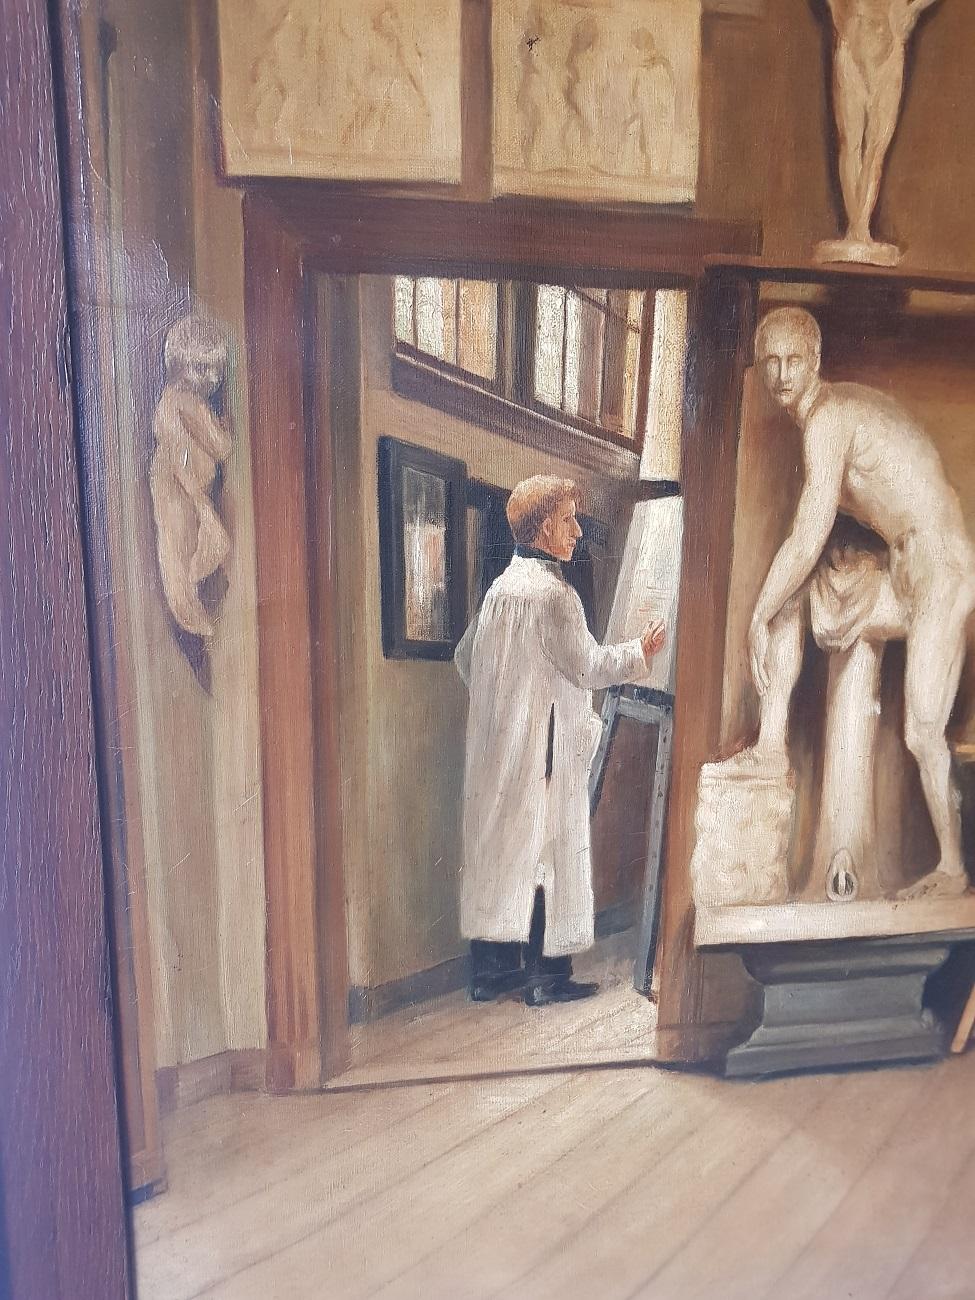 Oil on canvas signed by Adri Hartwijk (1887-1966) depicting a studio with a painter at work with sculptures and with a oak frame, 1st half 20th century (painting is restretched and it has a few spots of paint loss).

The measurements are incl.